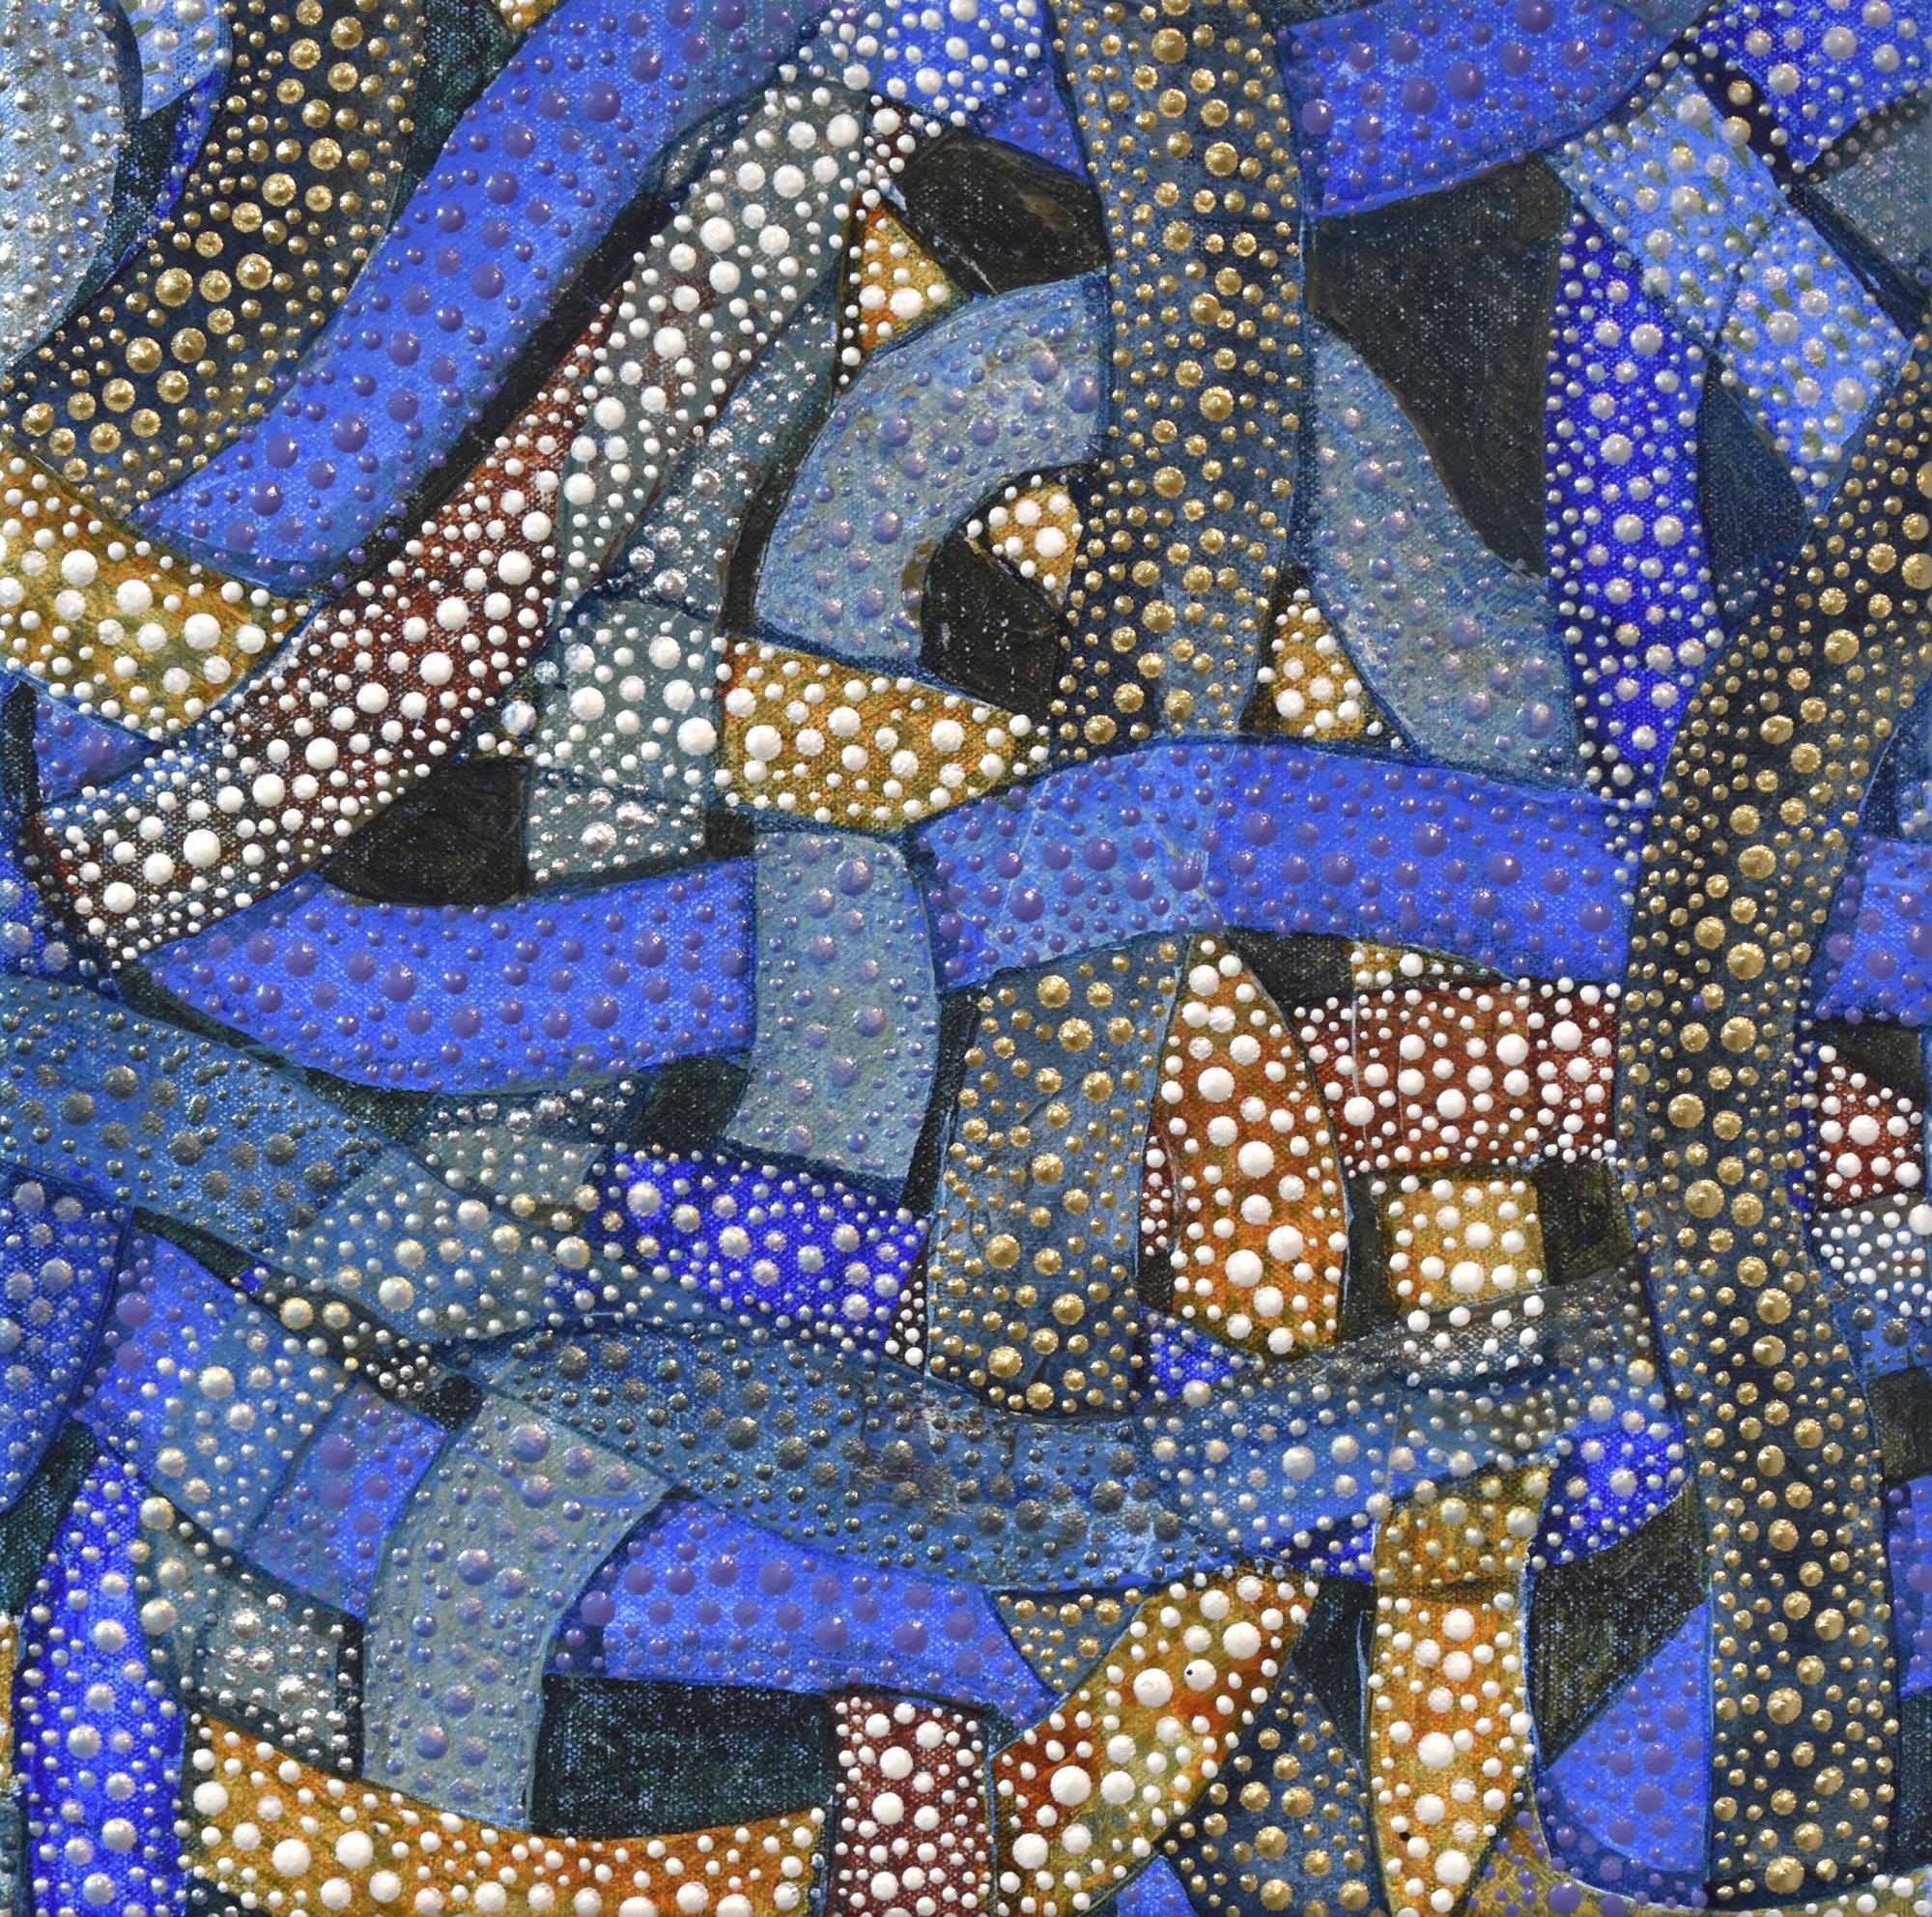 "Tangle 3", abstract, blue, earthy orange, dots, gold, silver, acrylic painting